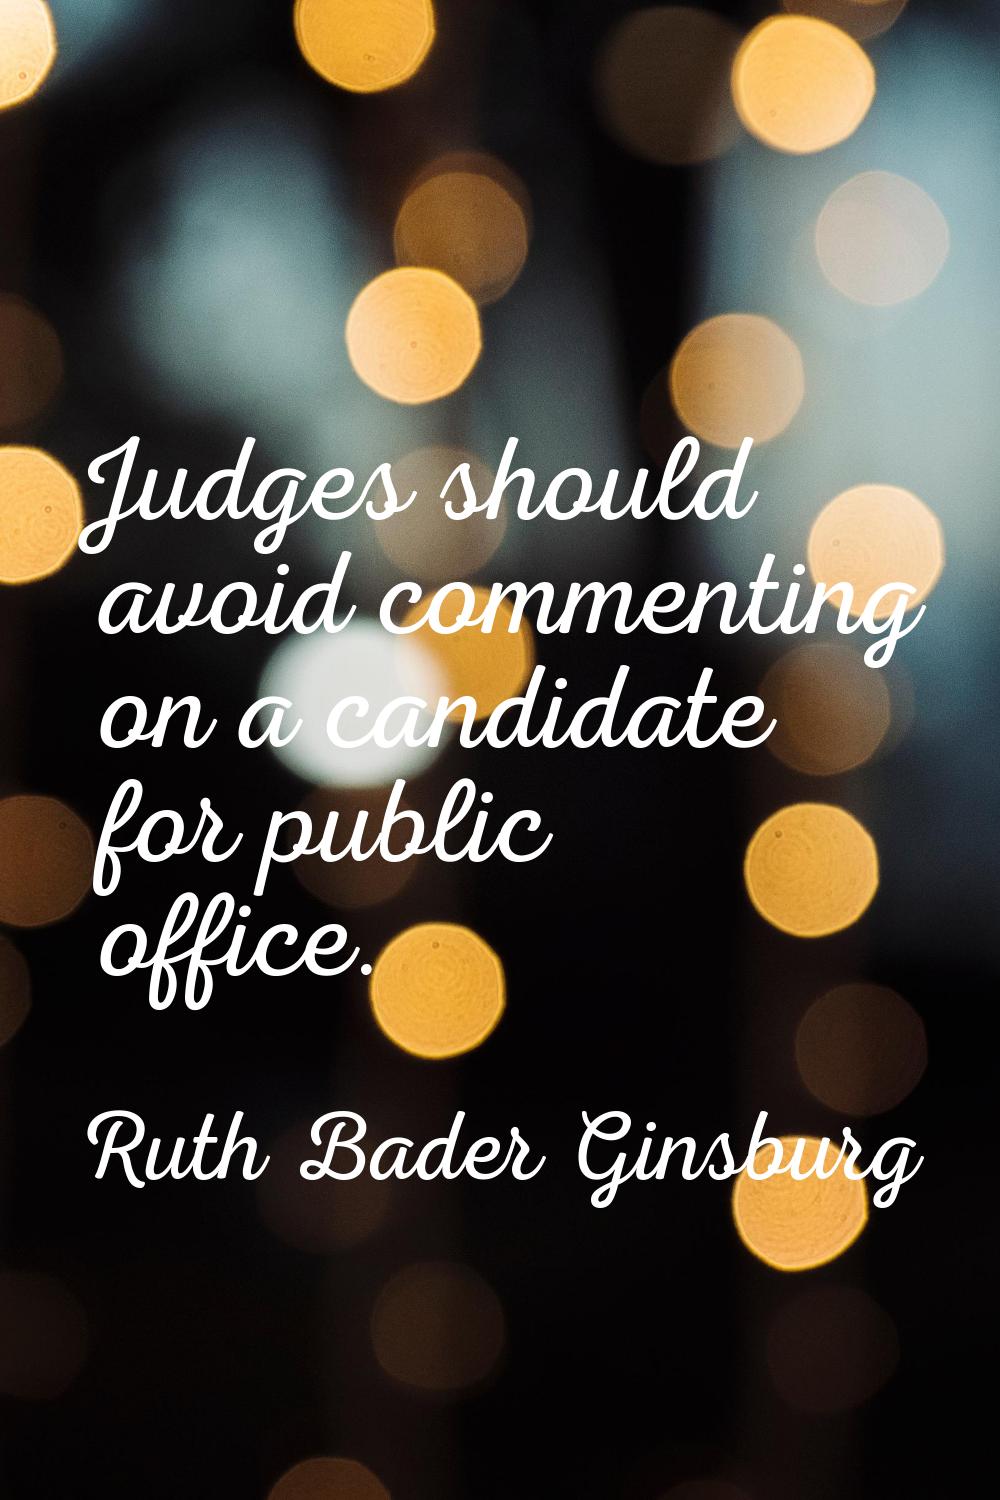 Judges should avoid commenting on a candidate for public office.